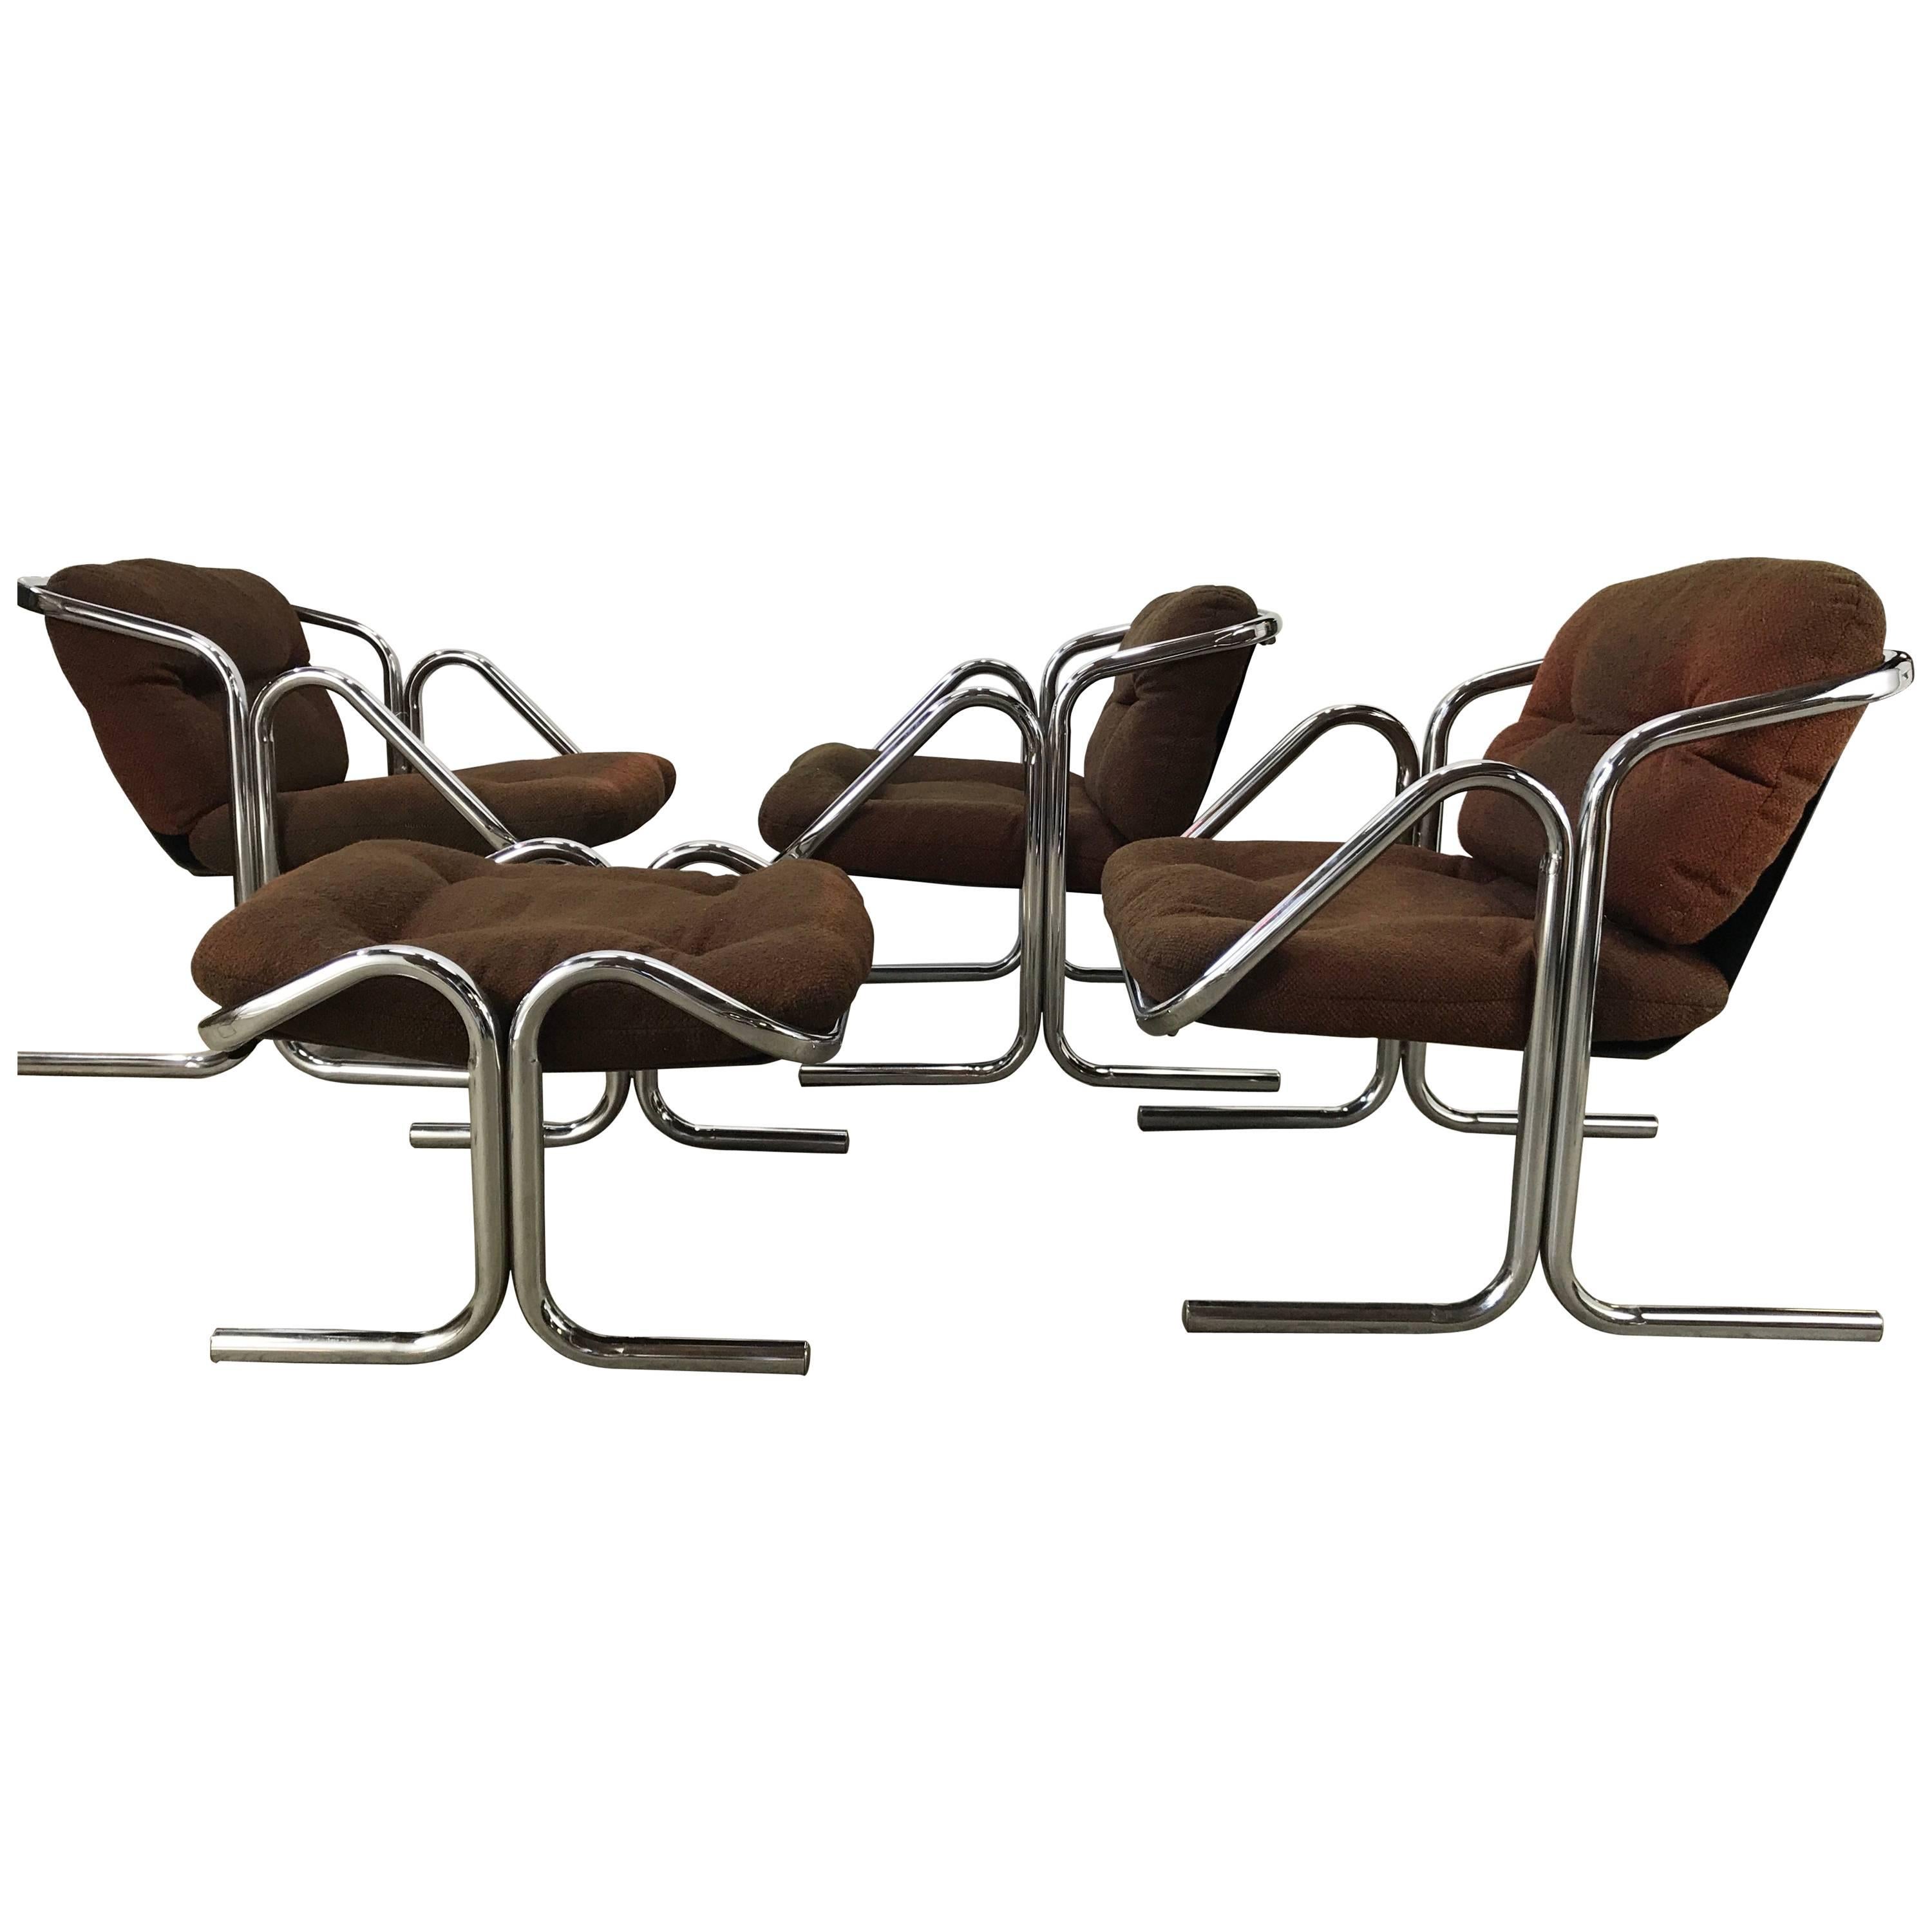 Set of Three Chairs and Ottoman by Jerry Johnson, Modernist Chrome/Canvas/Wool